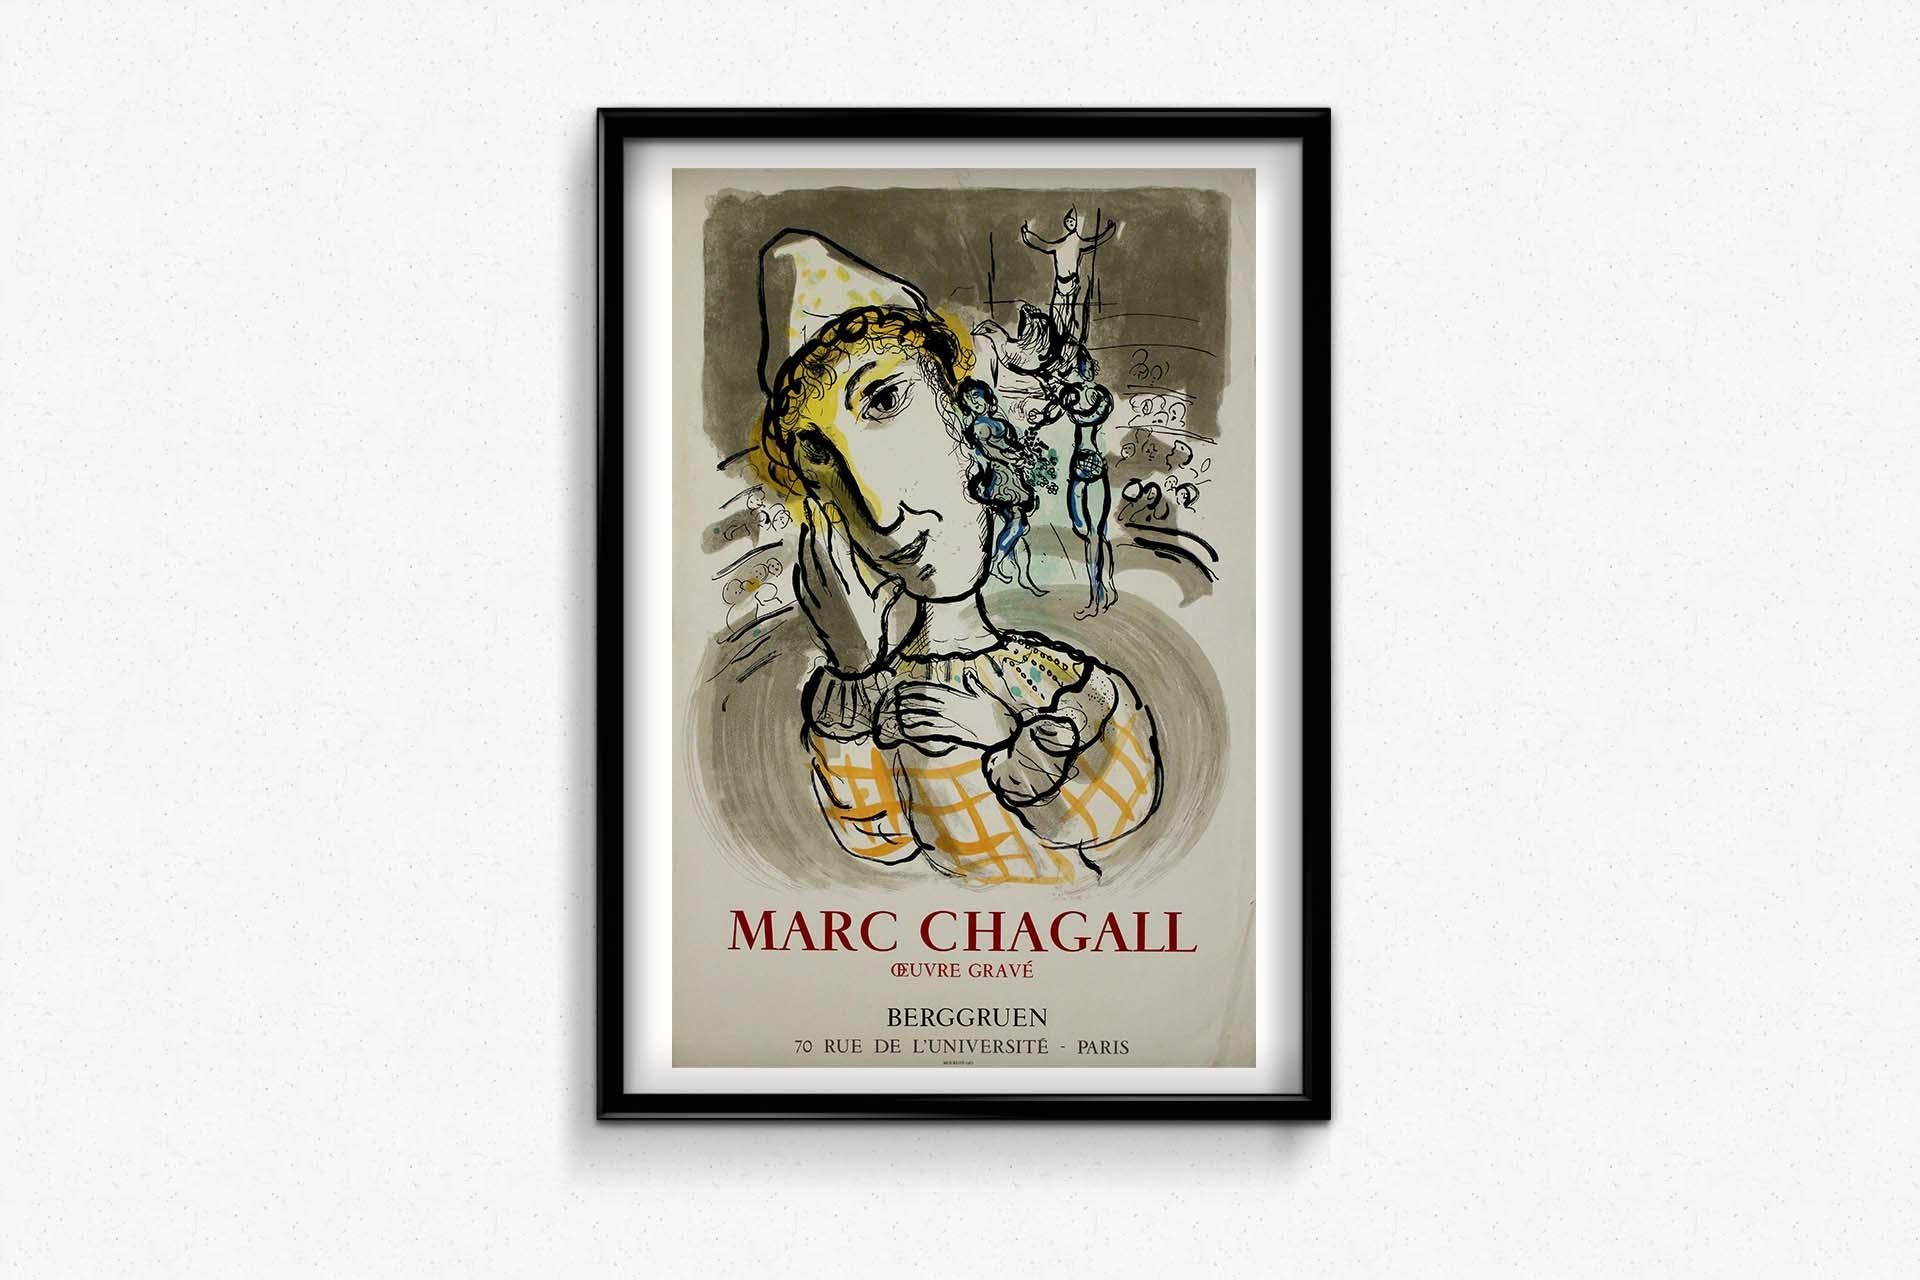 1967 Original poster by Marc Chagall 